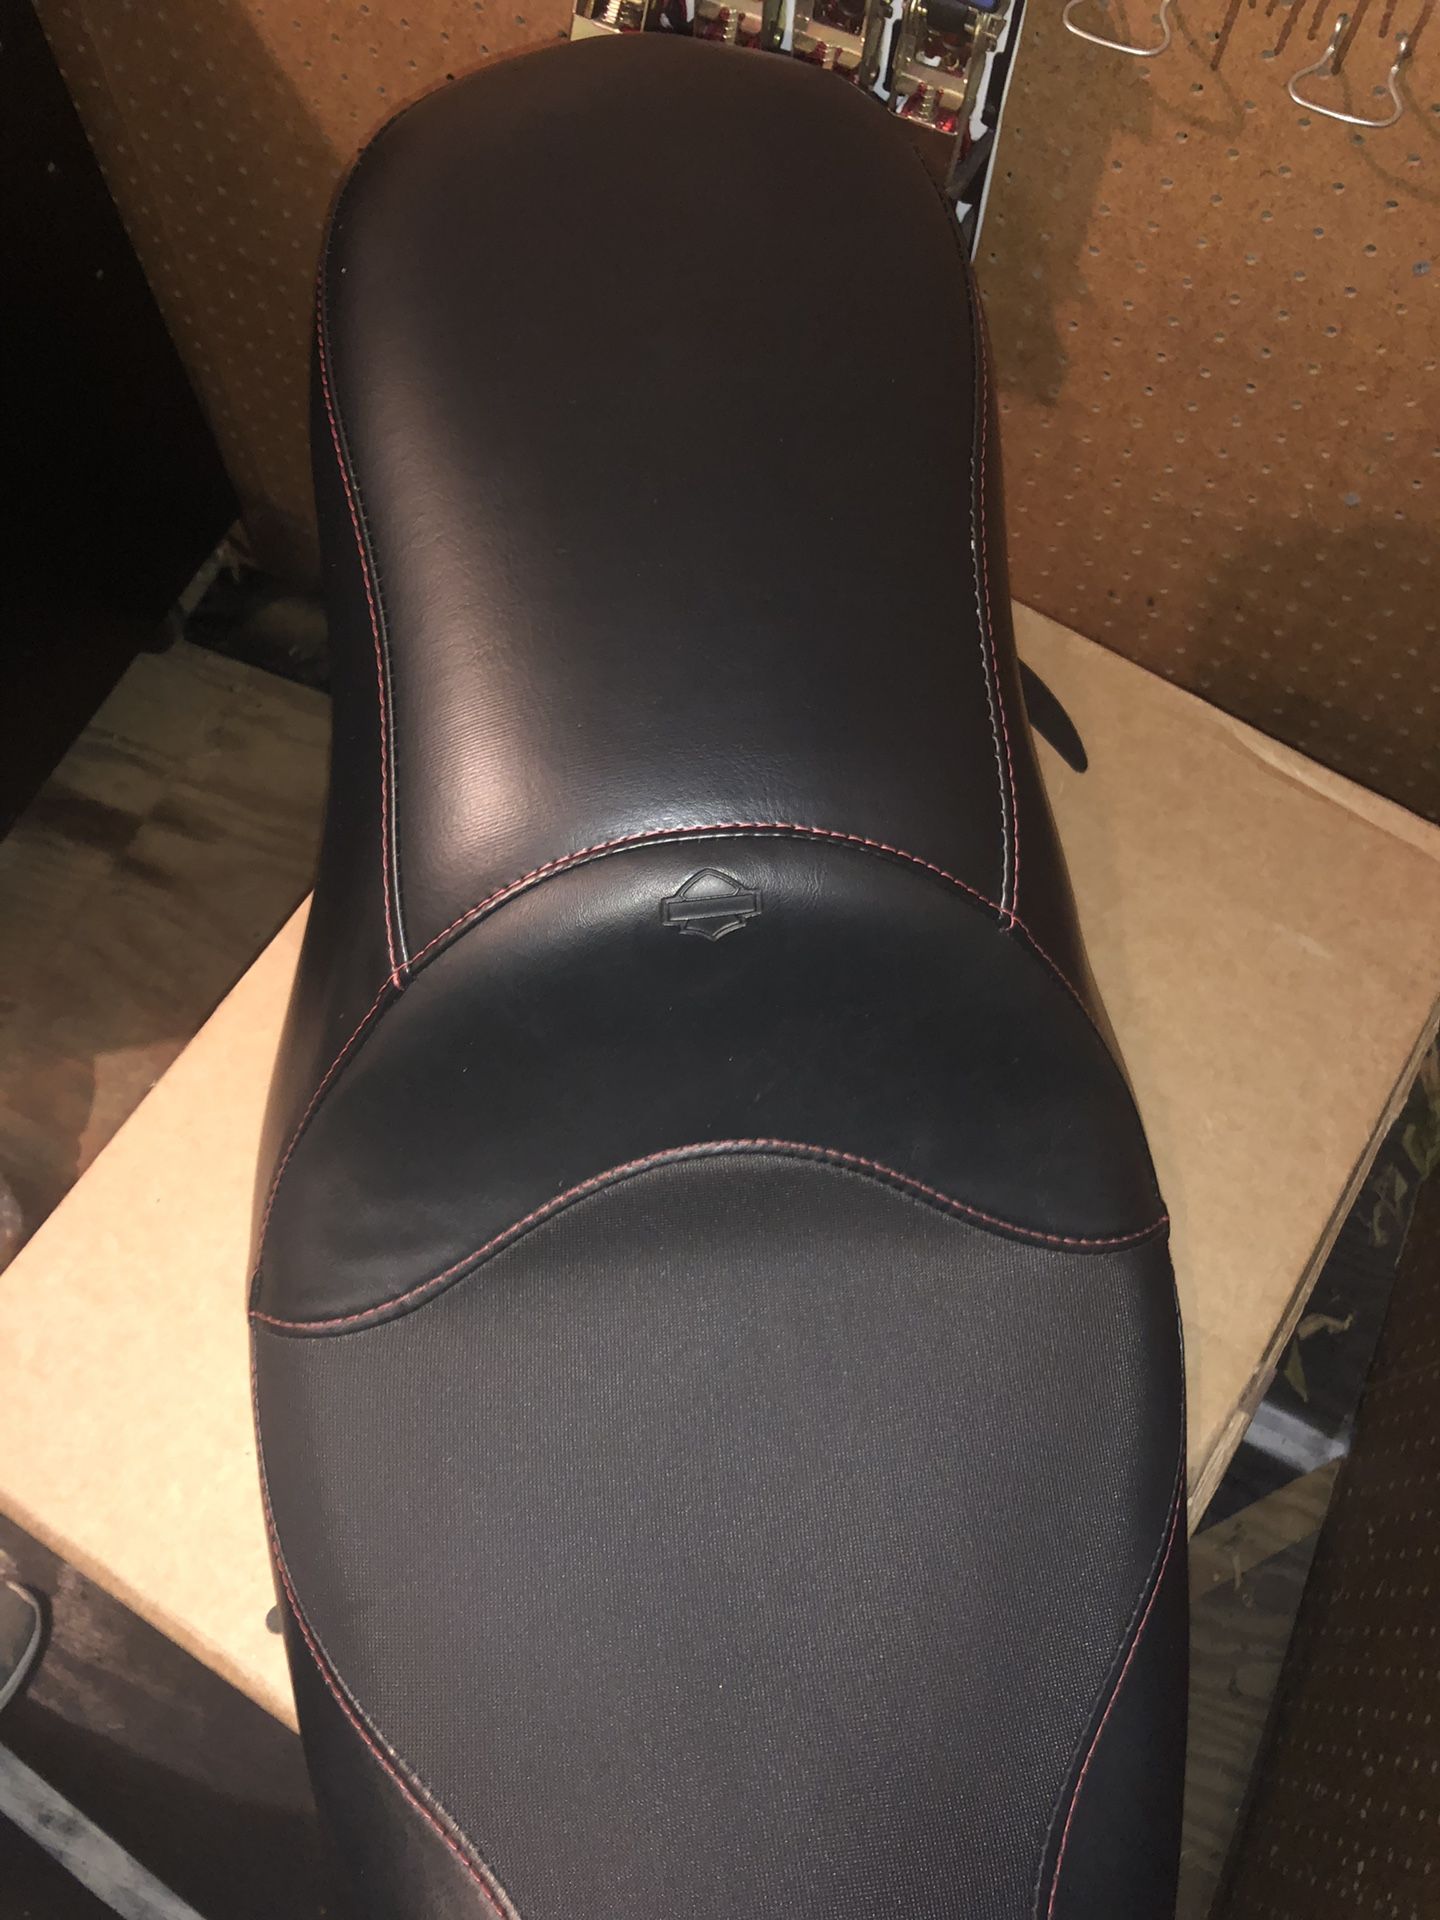 Harley Davidson Motorcycle seat reupholstered fits Dyna 2000-2005